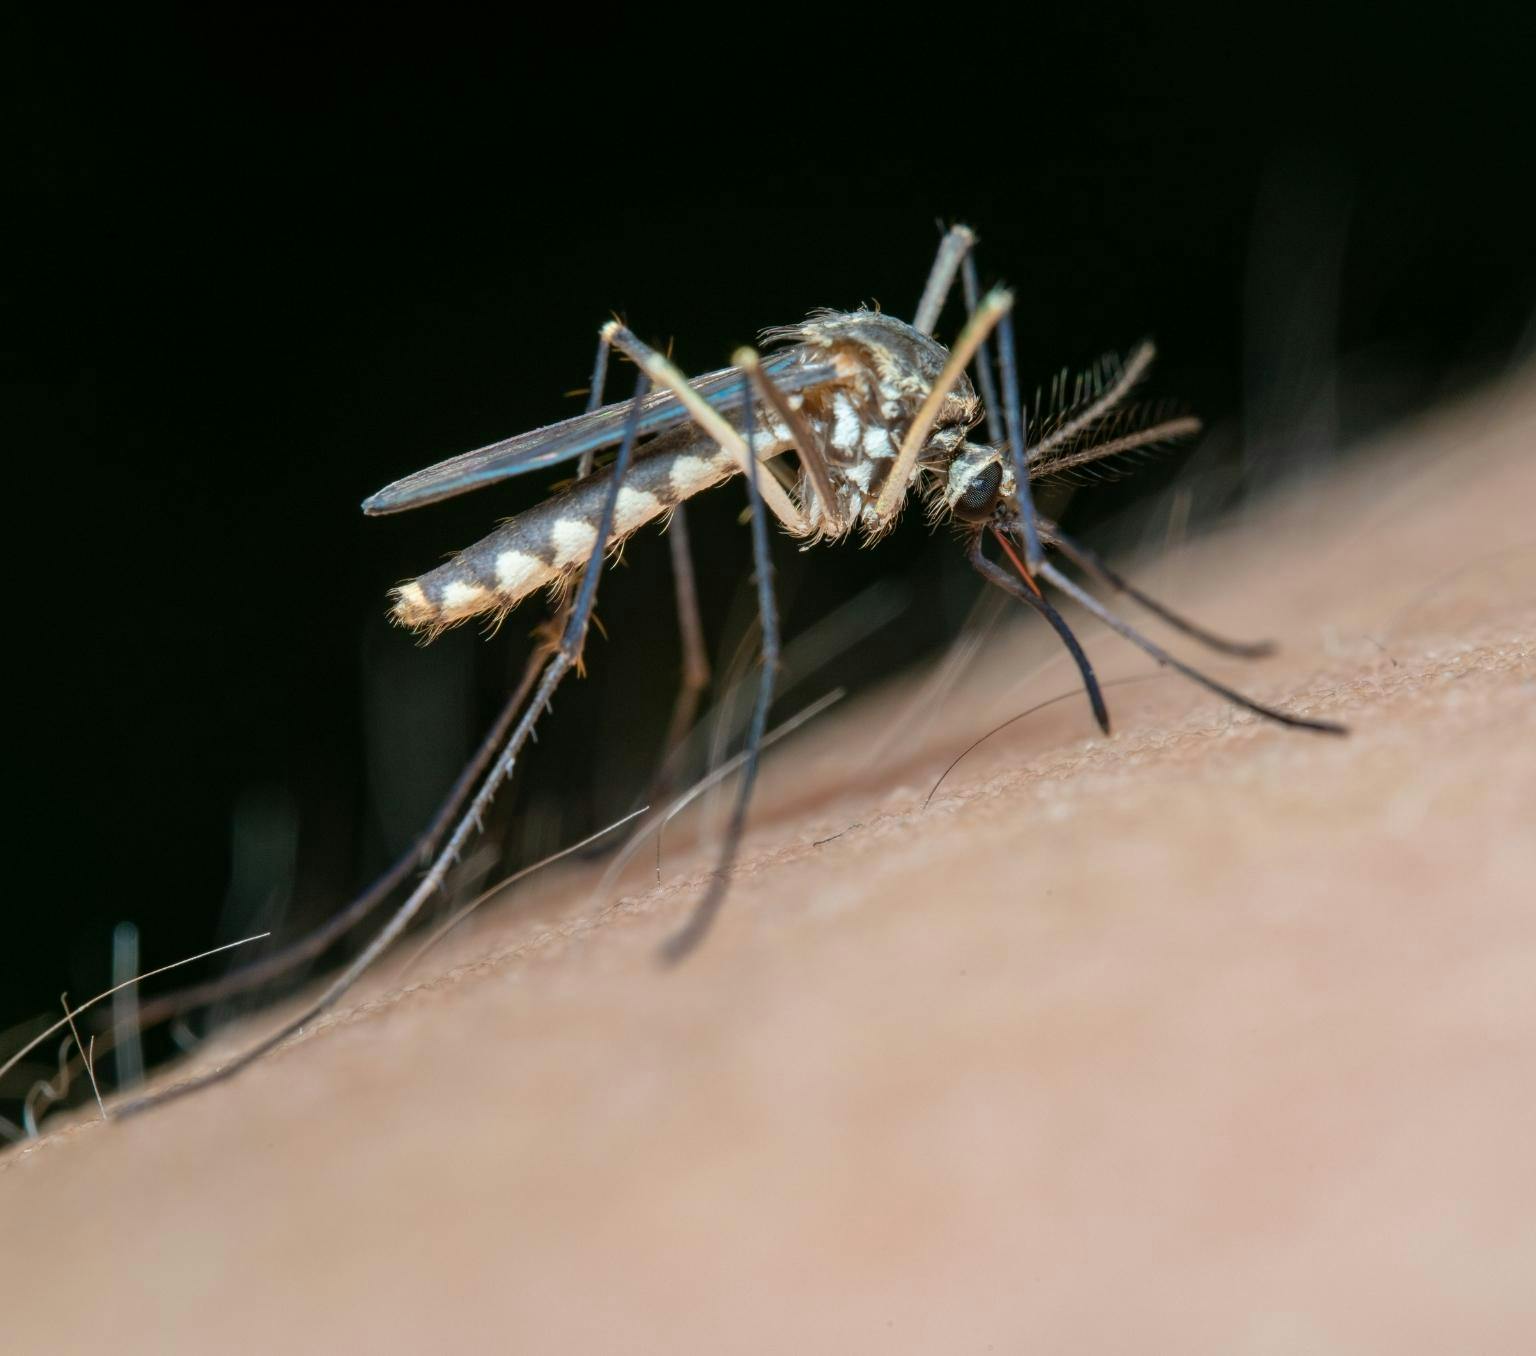 a close up of a mosquito resting on human skin